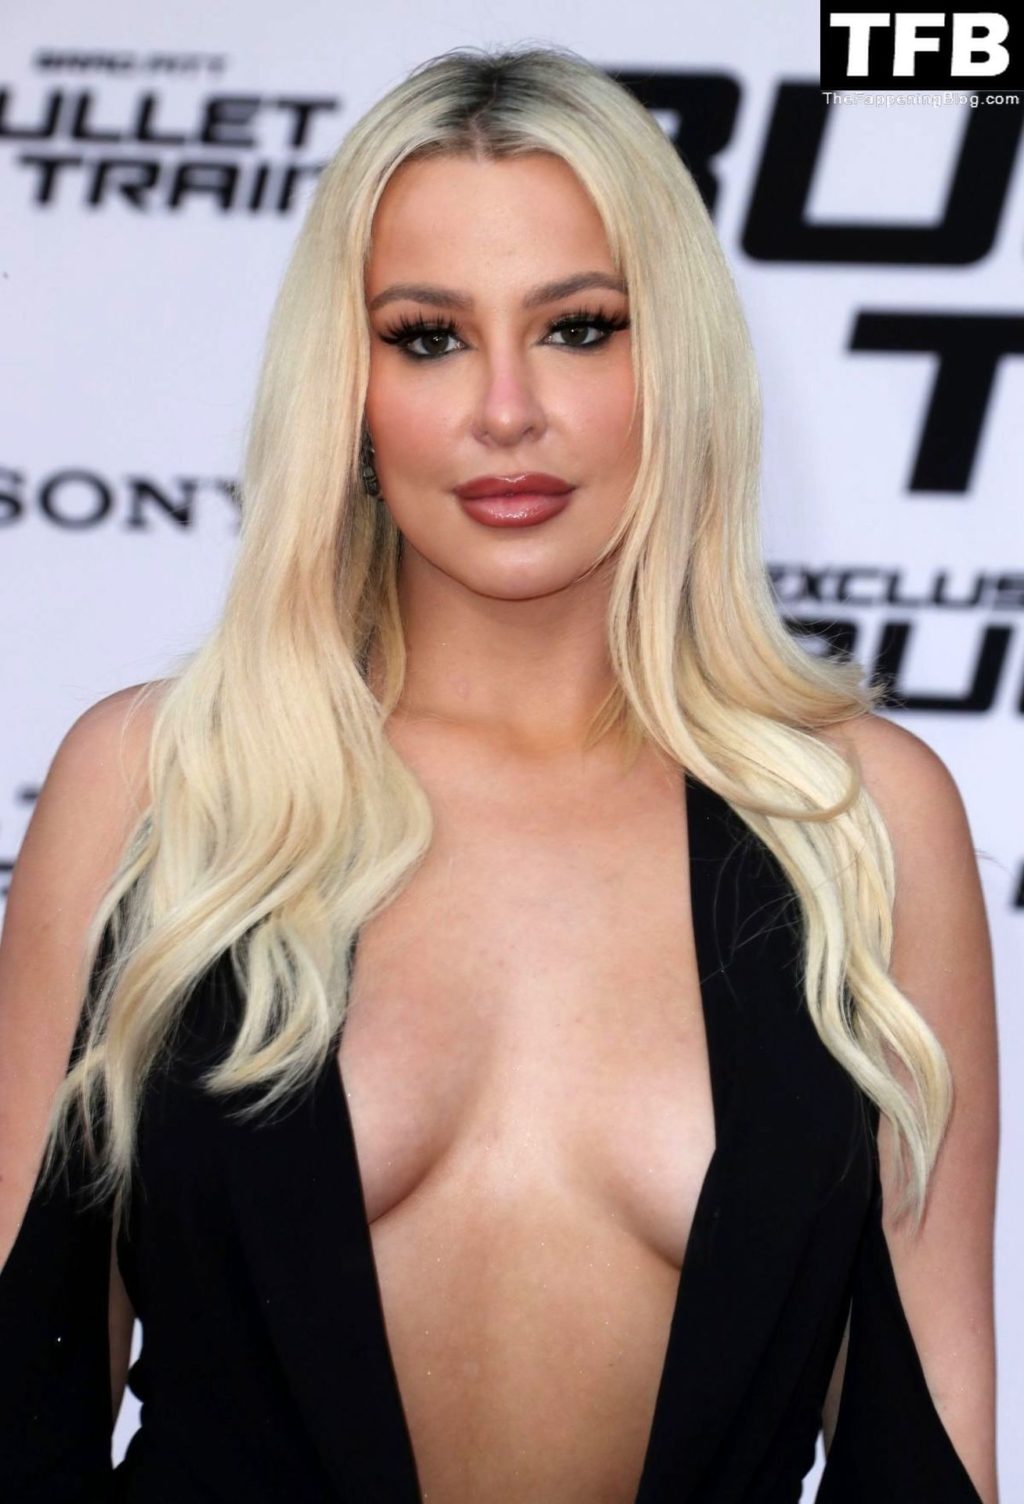 Tana Mongeau Poses Braless at the LA Premiere of Sony Pictures’ “Bullet Train” (35 Photos)